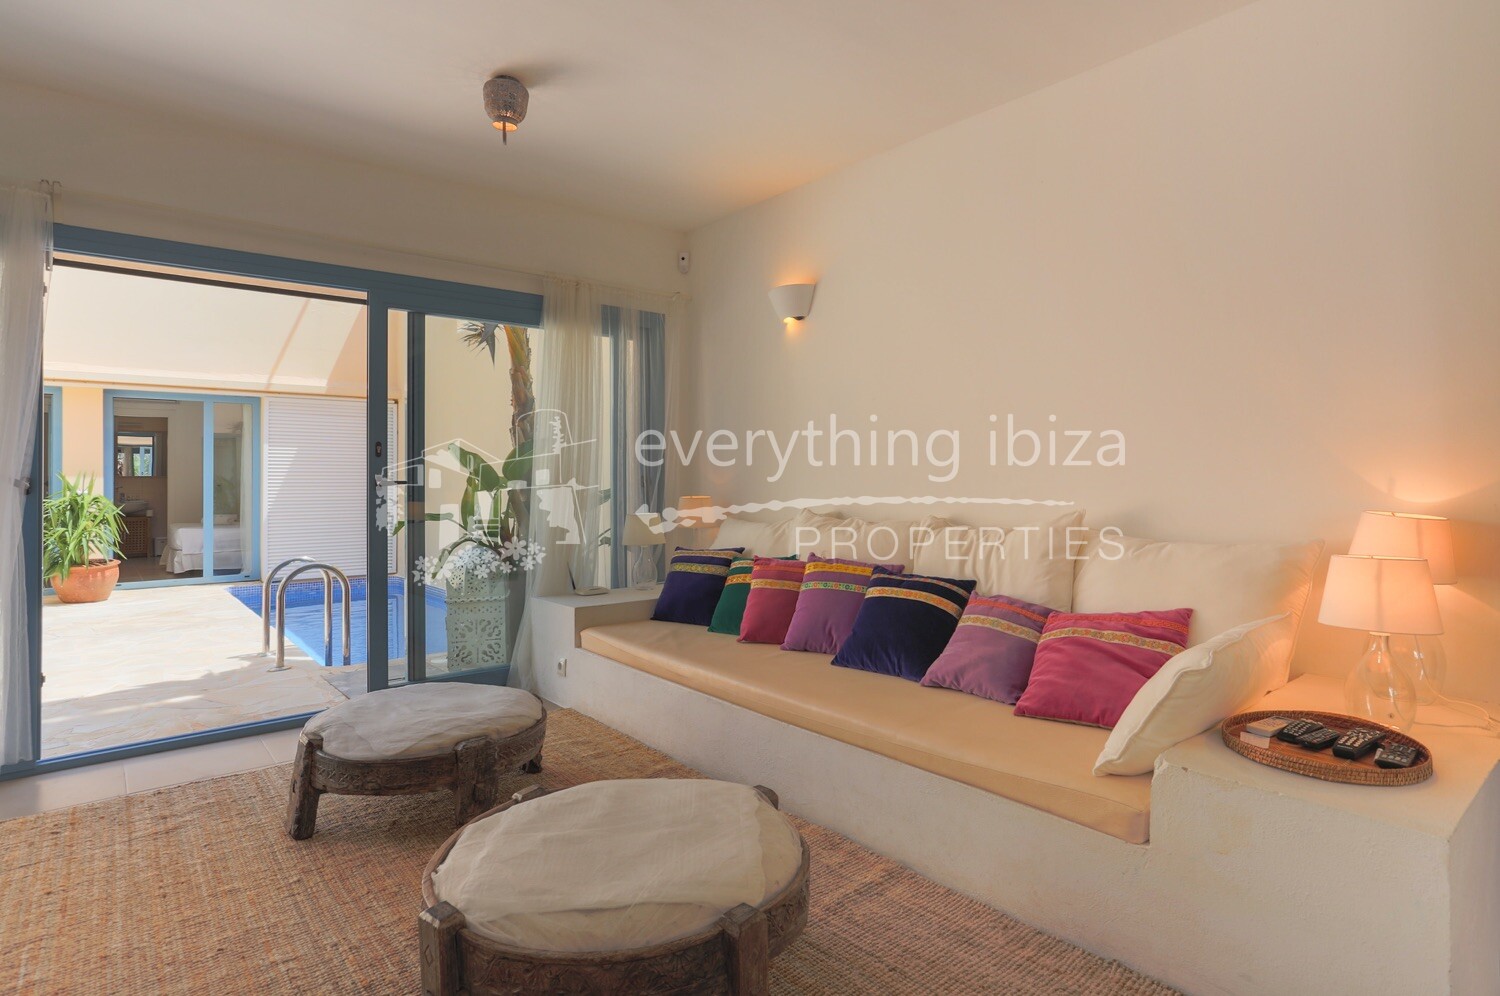 Ultra Stylish Townhouse Close to Nearby Beaches, ref. 1440, for sale in Ibiza by everything ibiza Properties